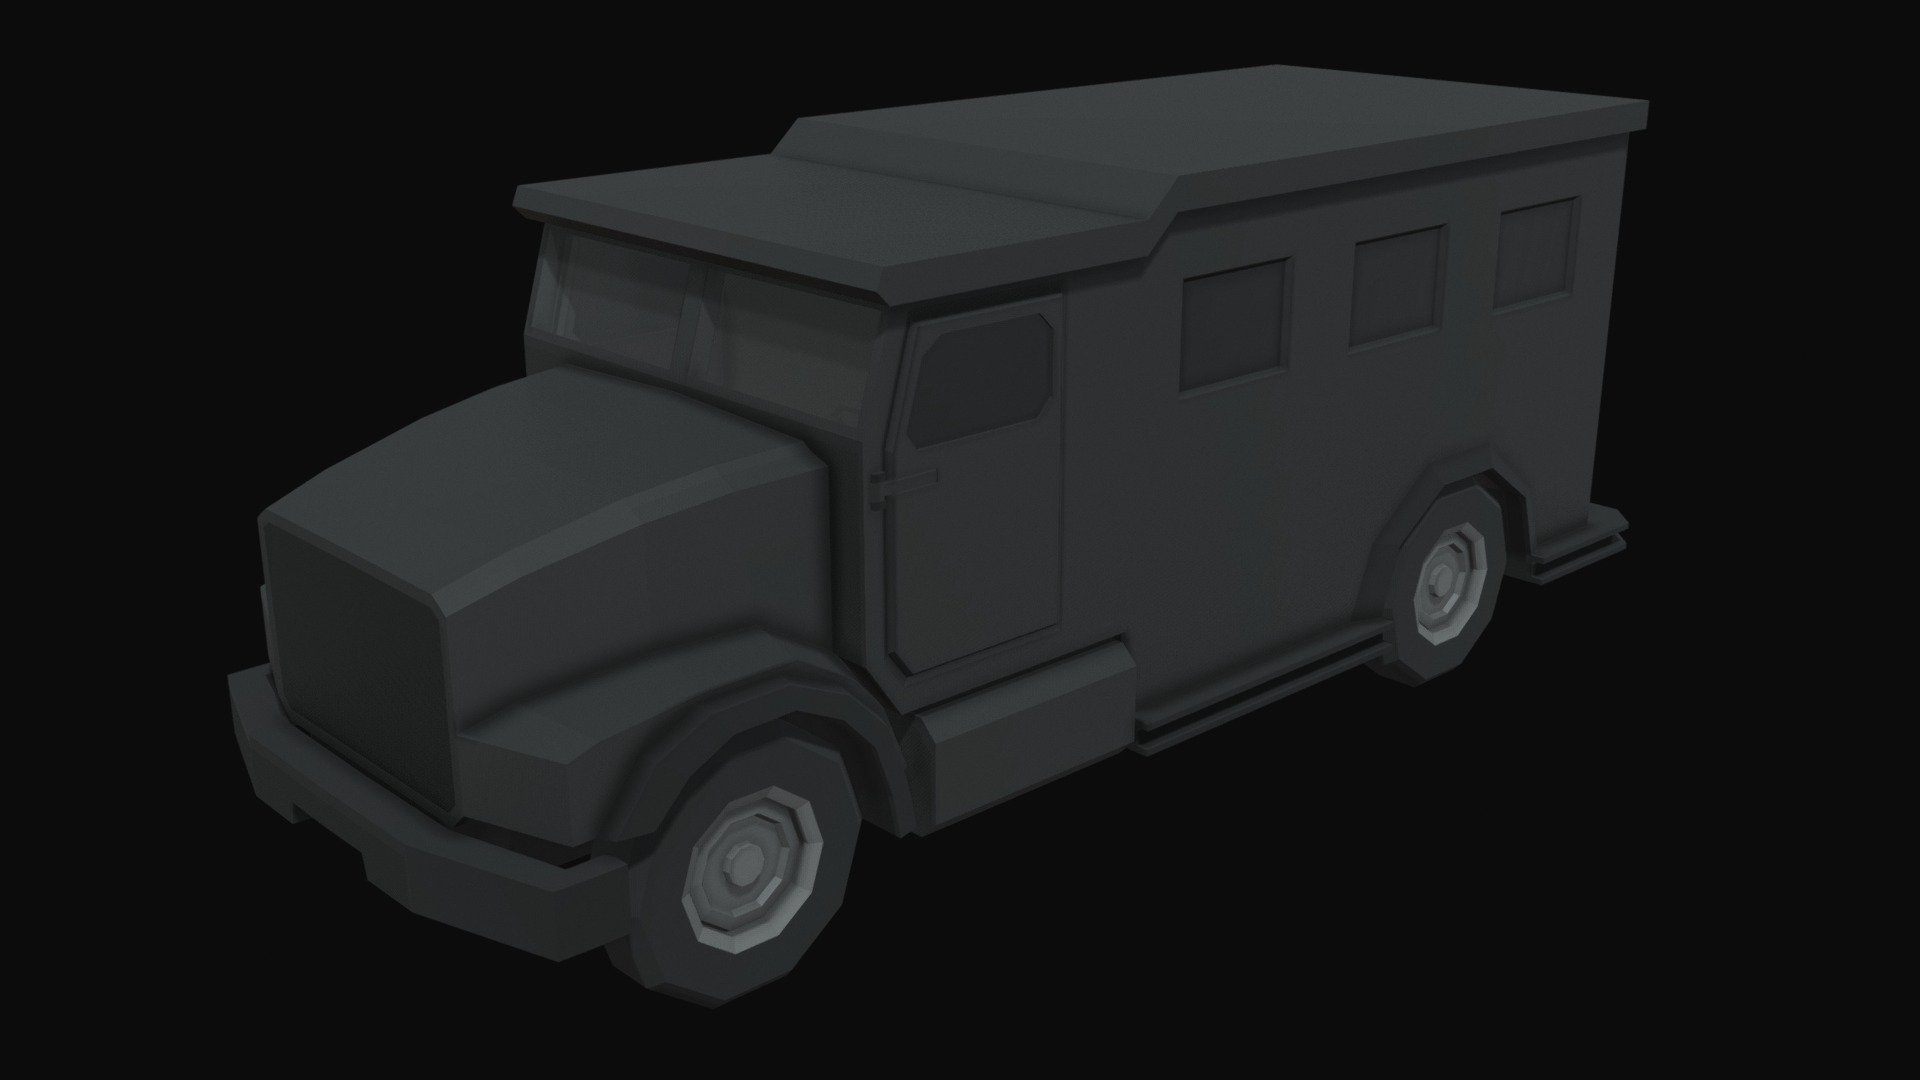 A low poly model of a Swat Van

Ideal for for use in games

Tested in unity

Has moving doors and interior

Made in blender - Swat Van Low Poly - Buy Royalty Free 3D model by Castletyne 3d model